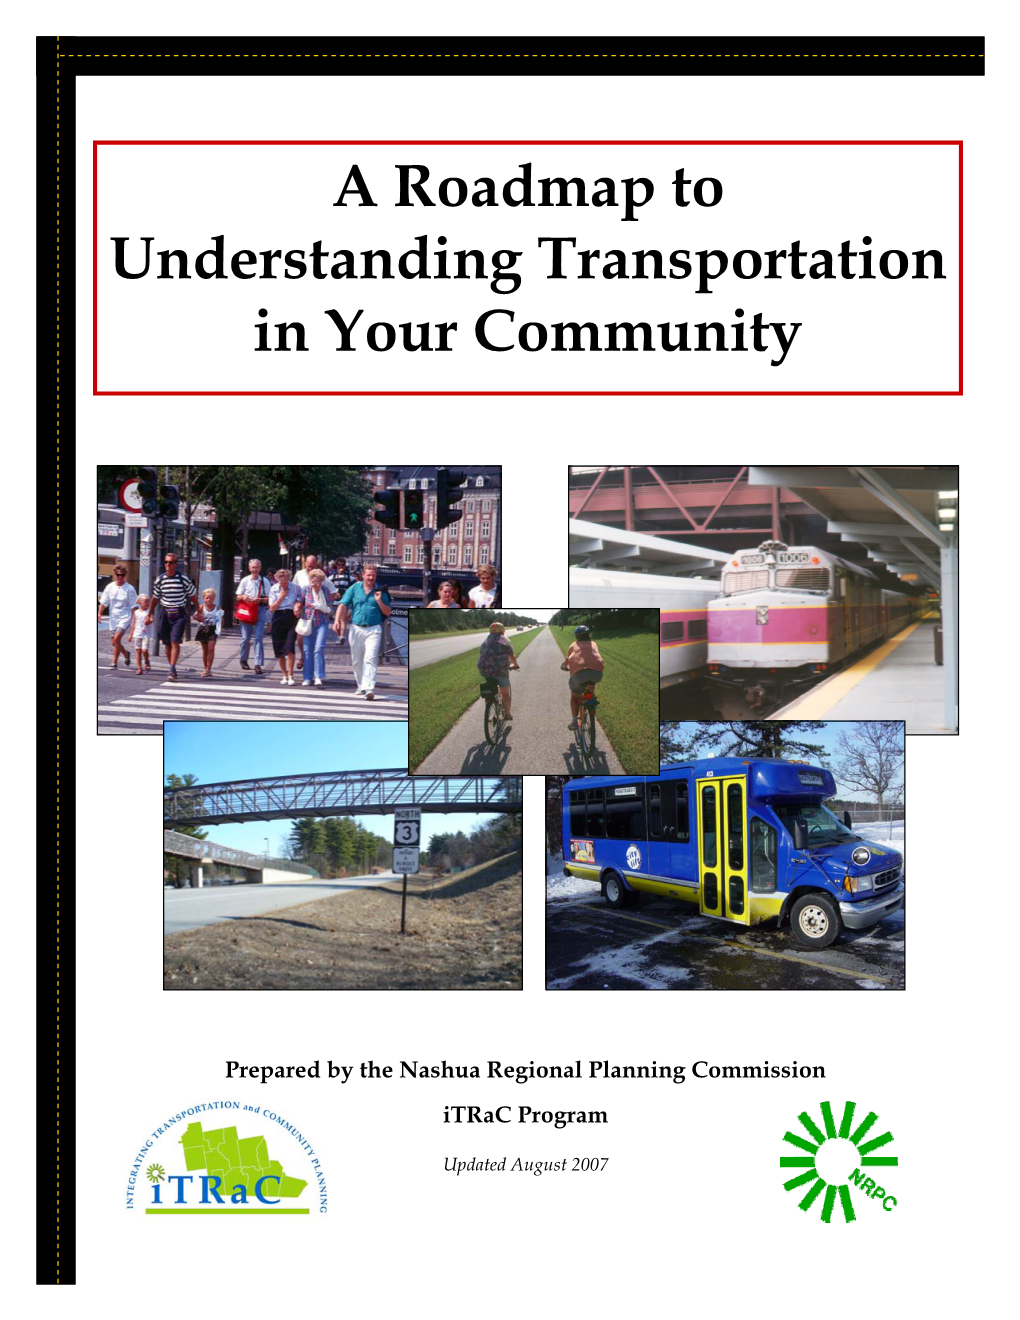 A Roadmap to Understanding Transportation in Your Community